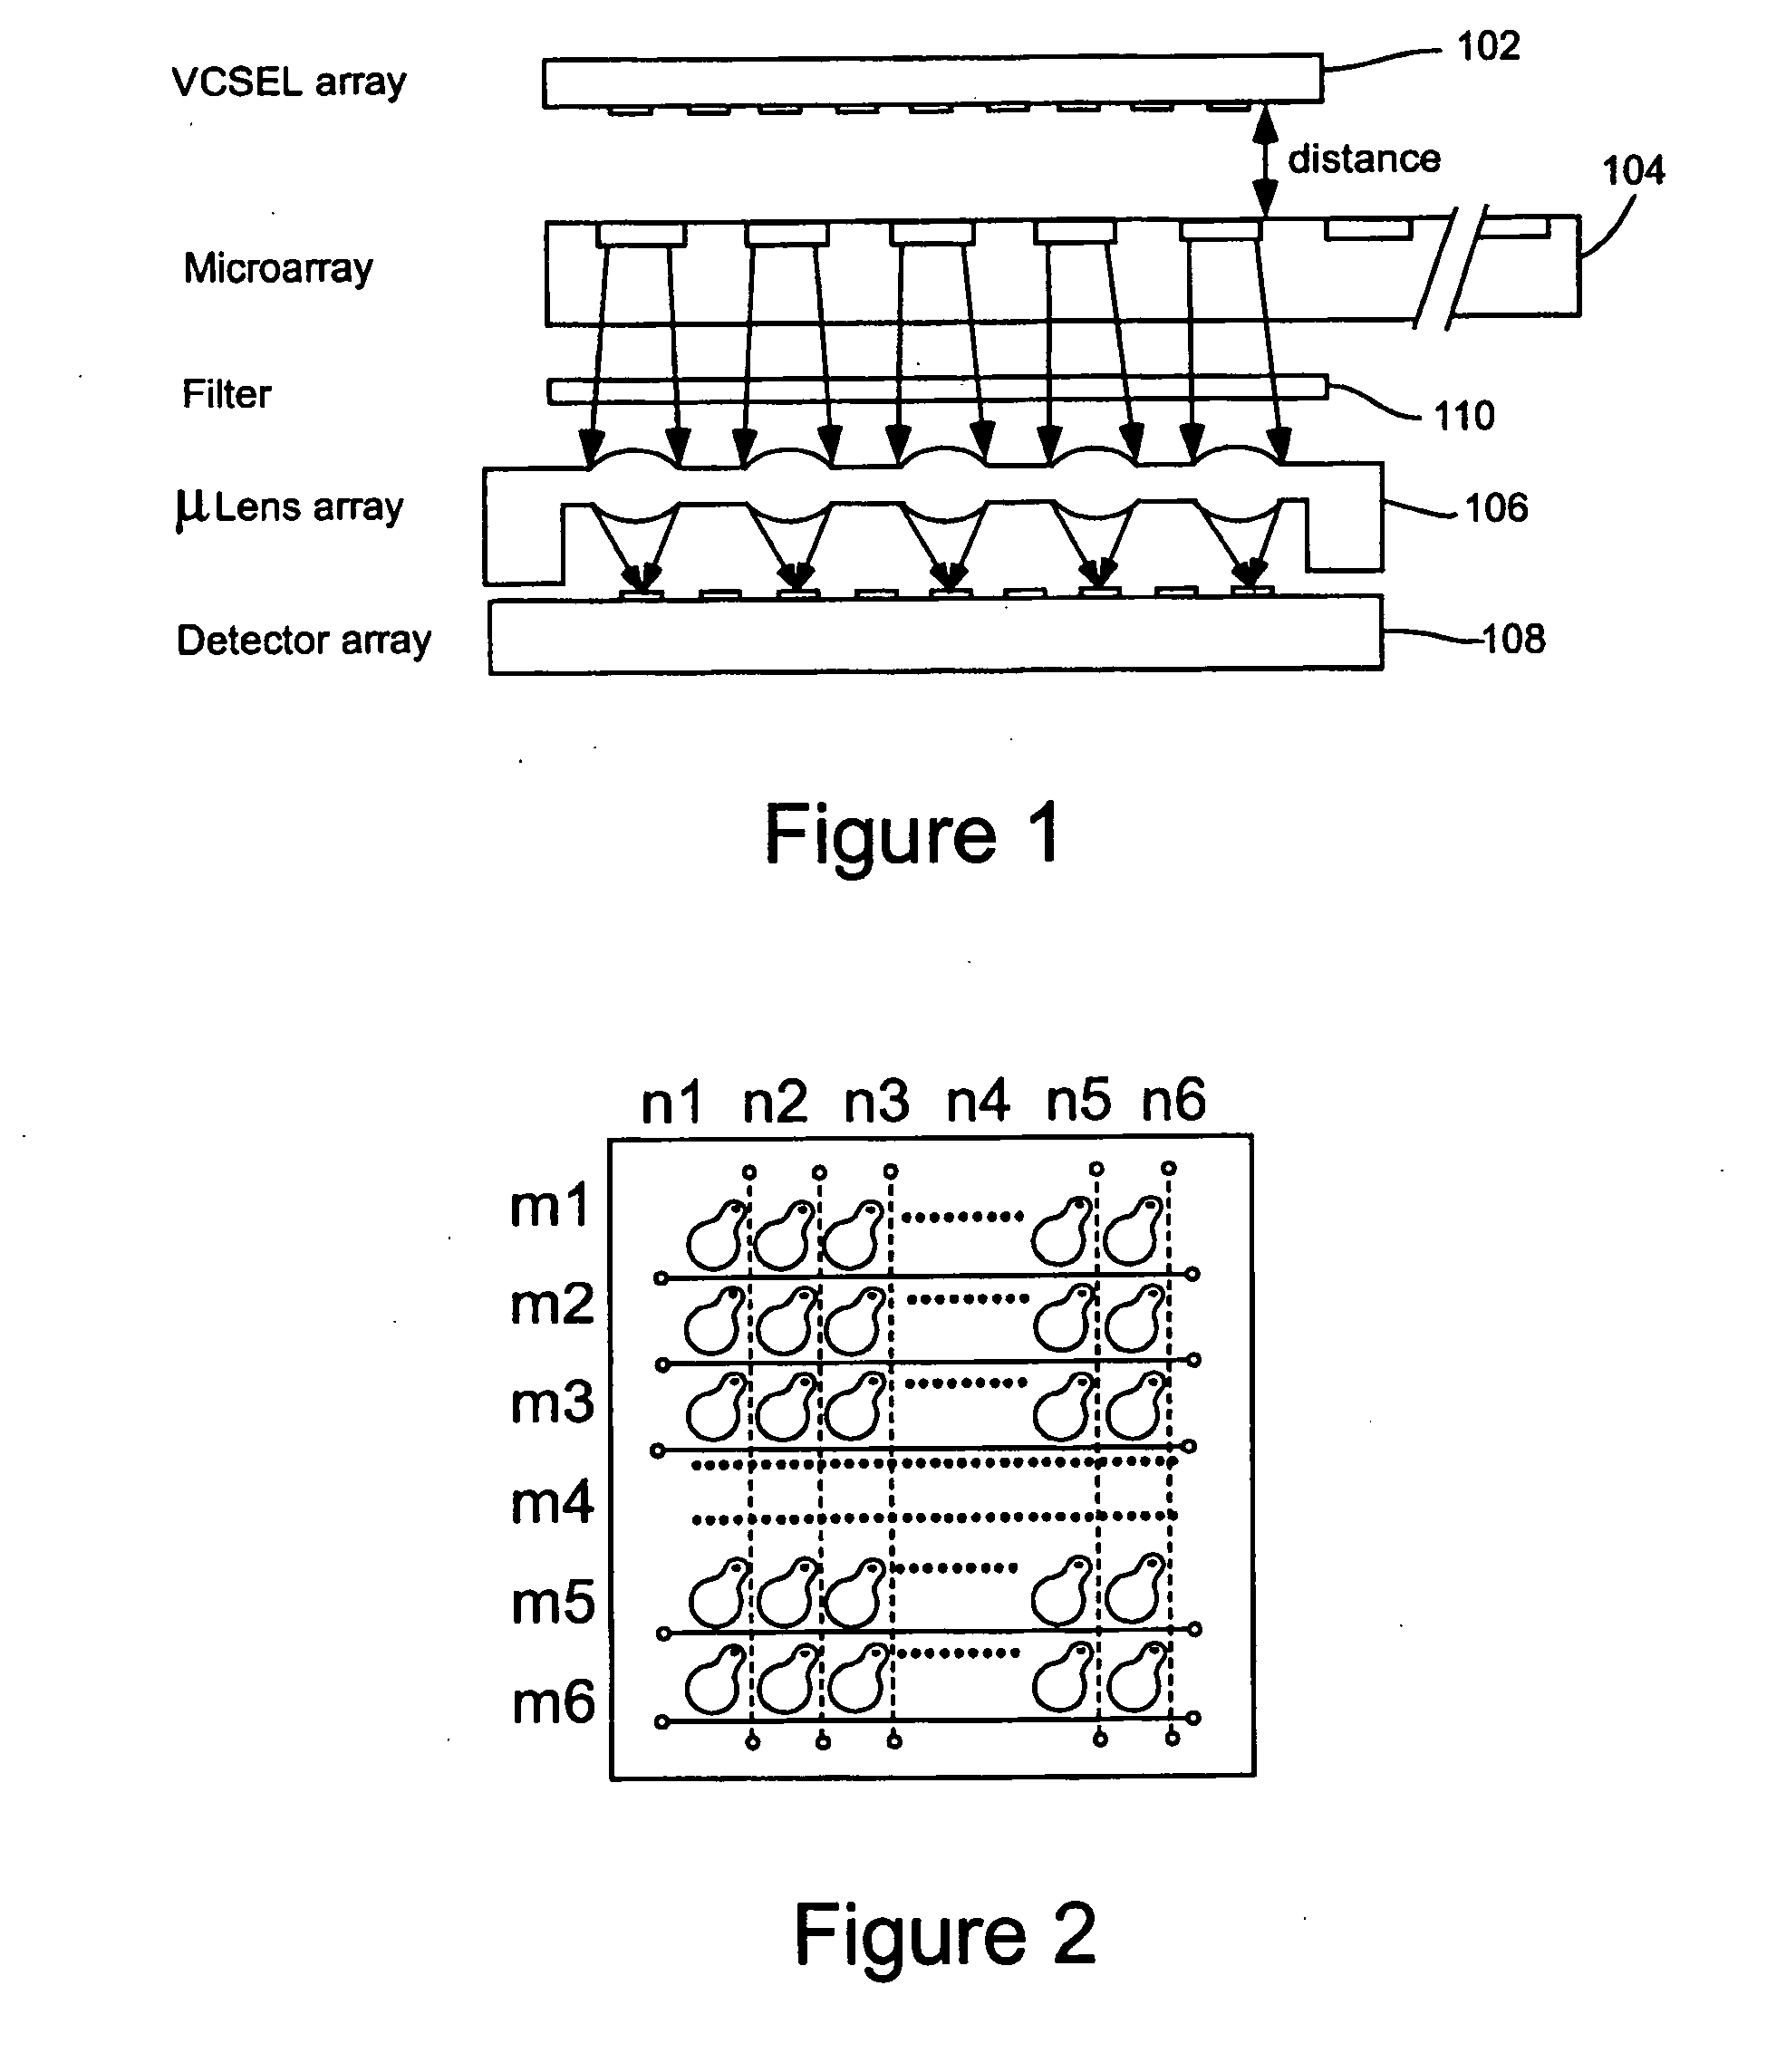 High throughput optical micro-array reader capable of variable pitch and spot size array processing for genomics and proteomics